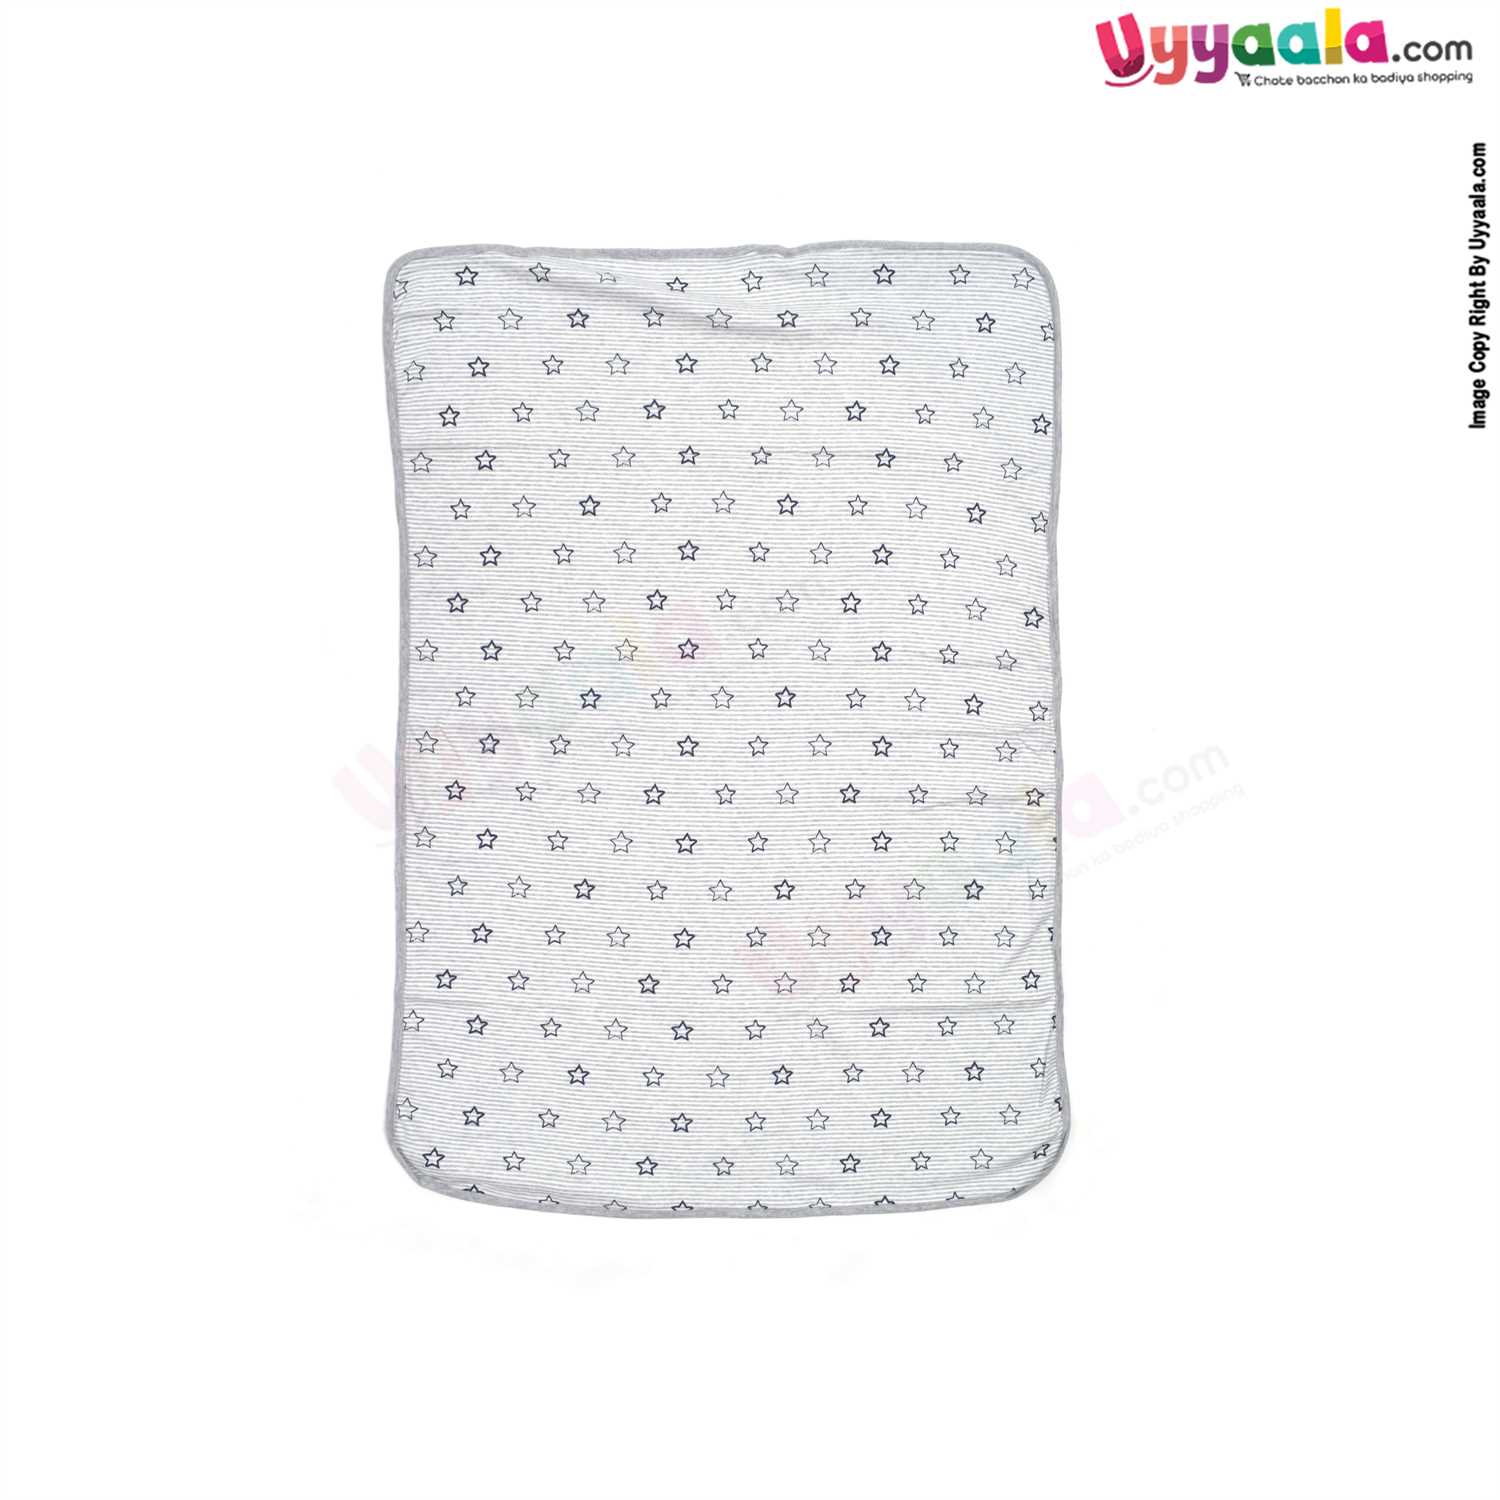 PRECIOUS ONE Baby Hooded Towel Premium 100% Cotton Hosiery with Star Print 0+m Age, Size (100*72) Grey